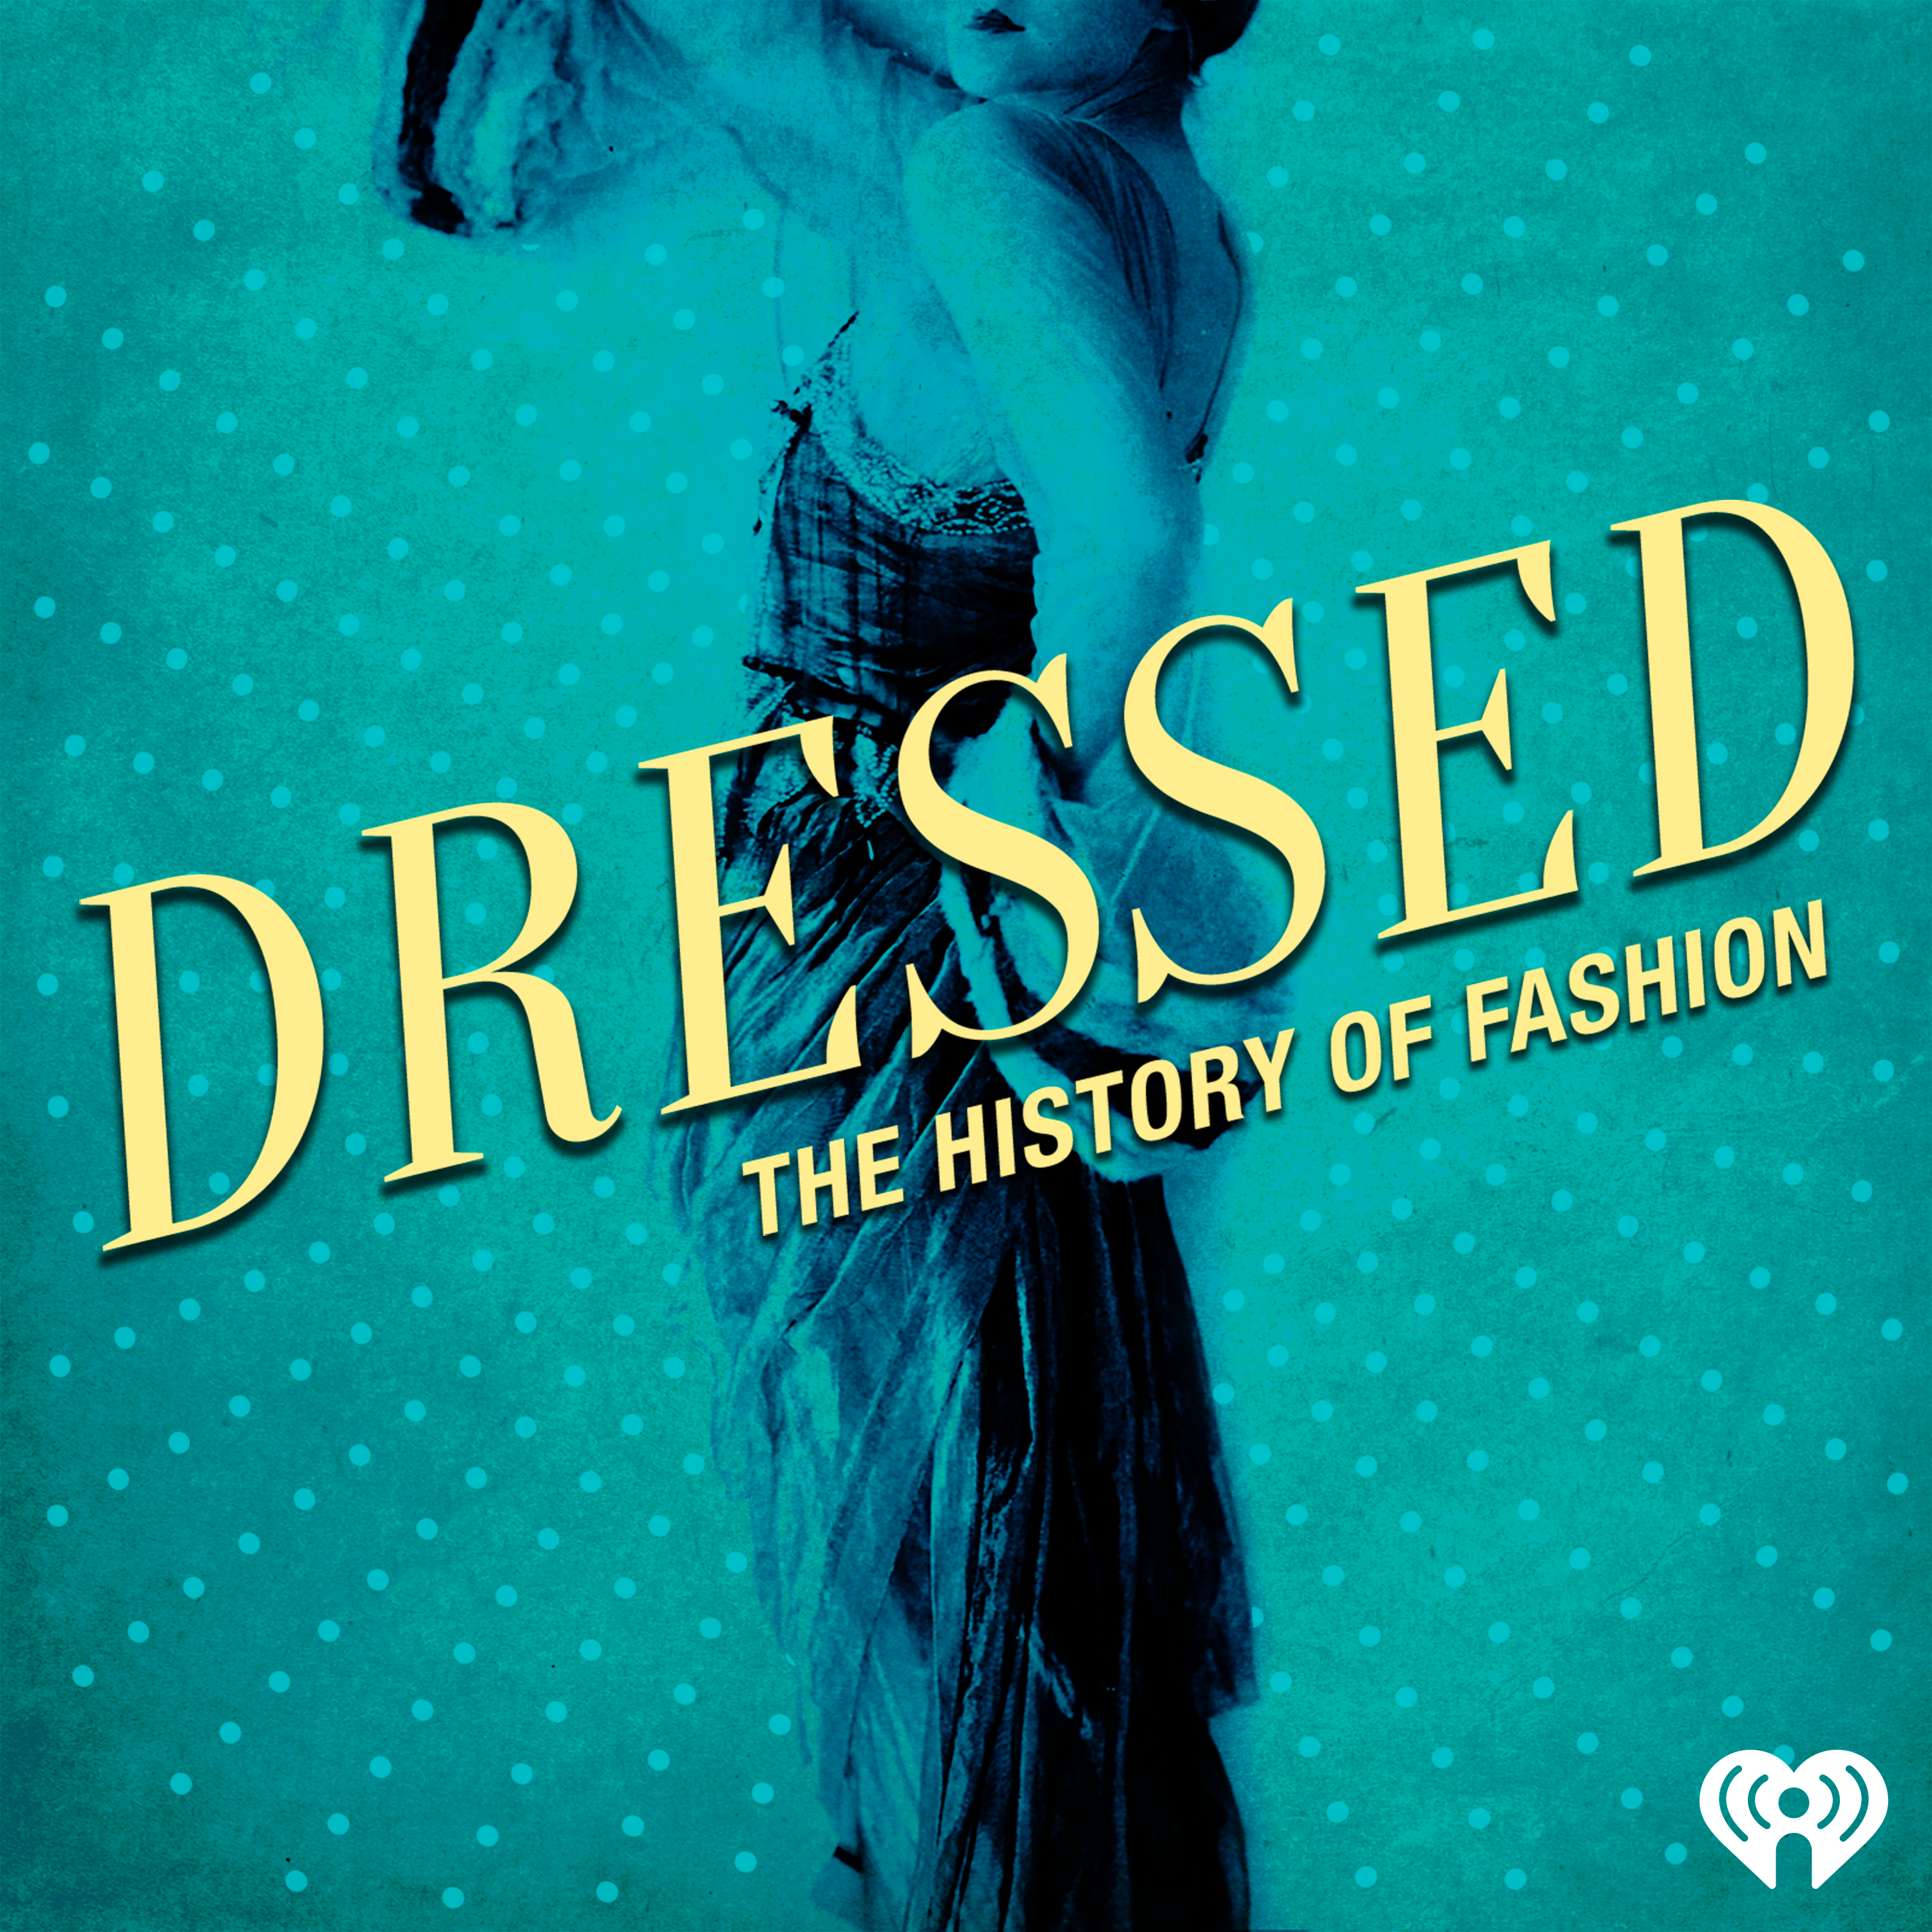 A highlight from Fashion History Now #32: Dressed in Paris